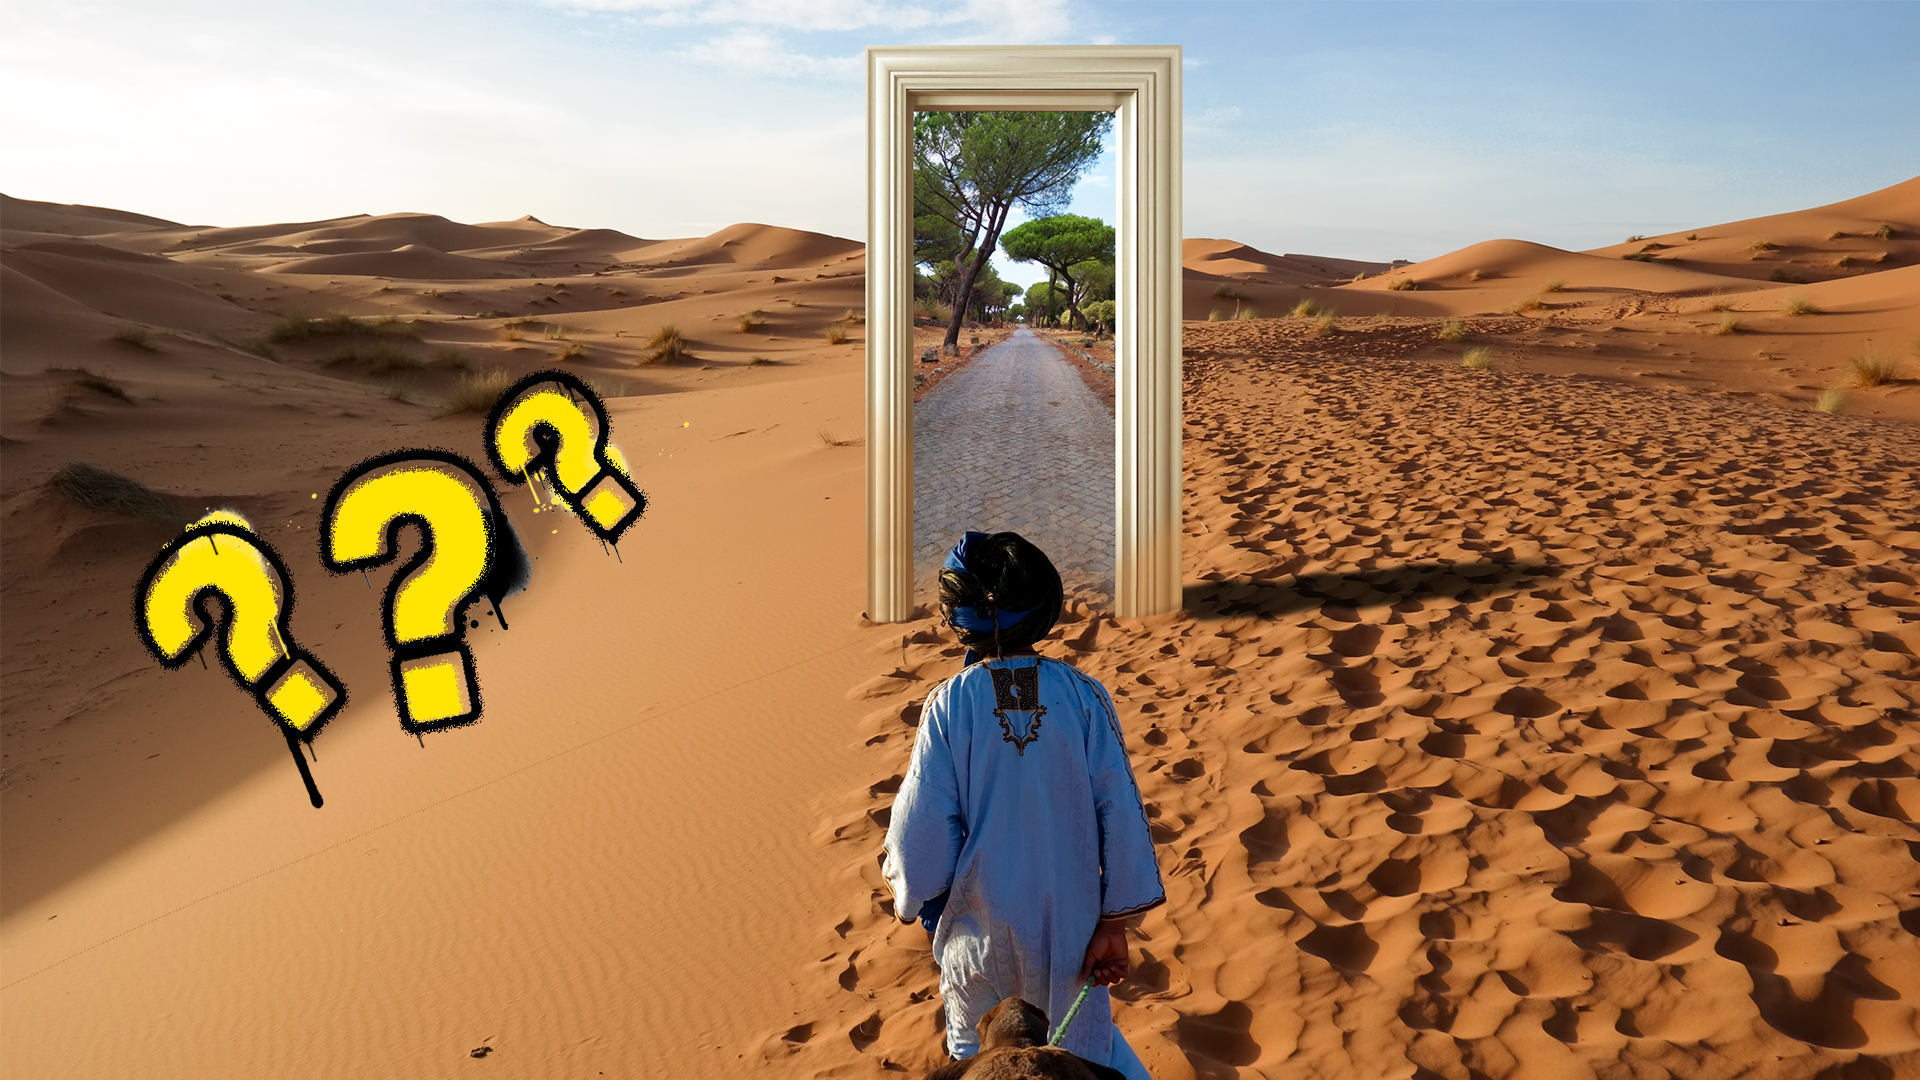 A person looking at a magical doorway in the middle of a dessert